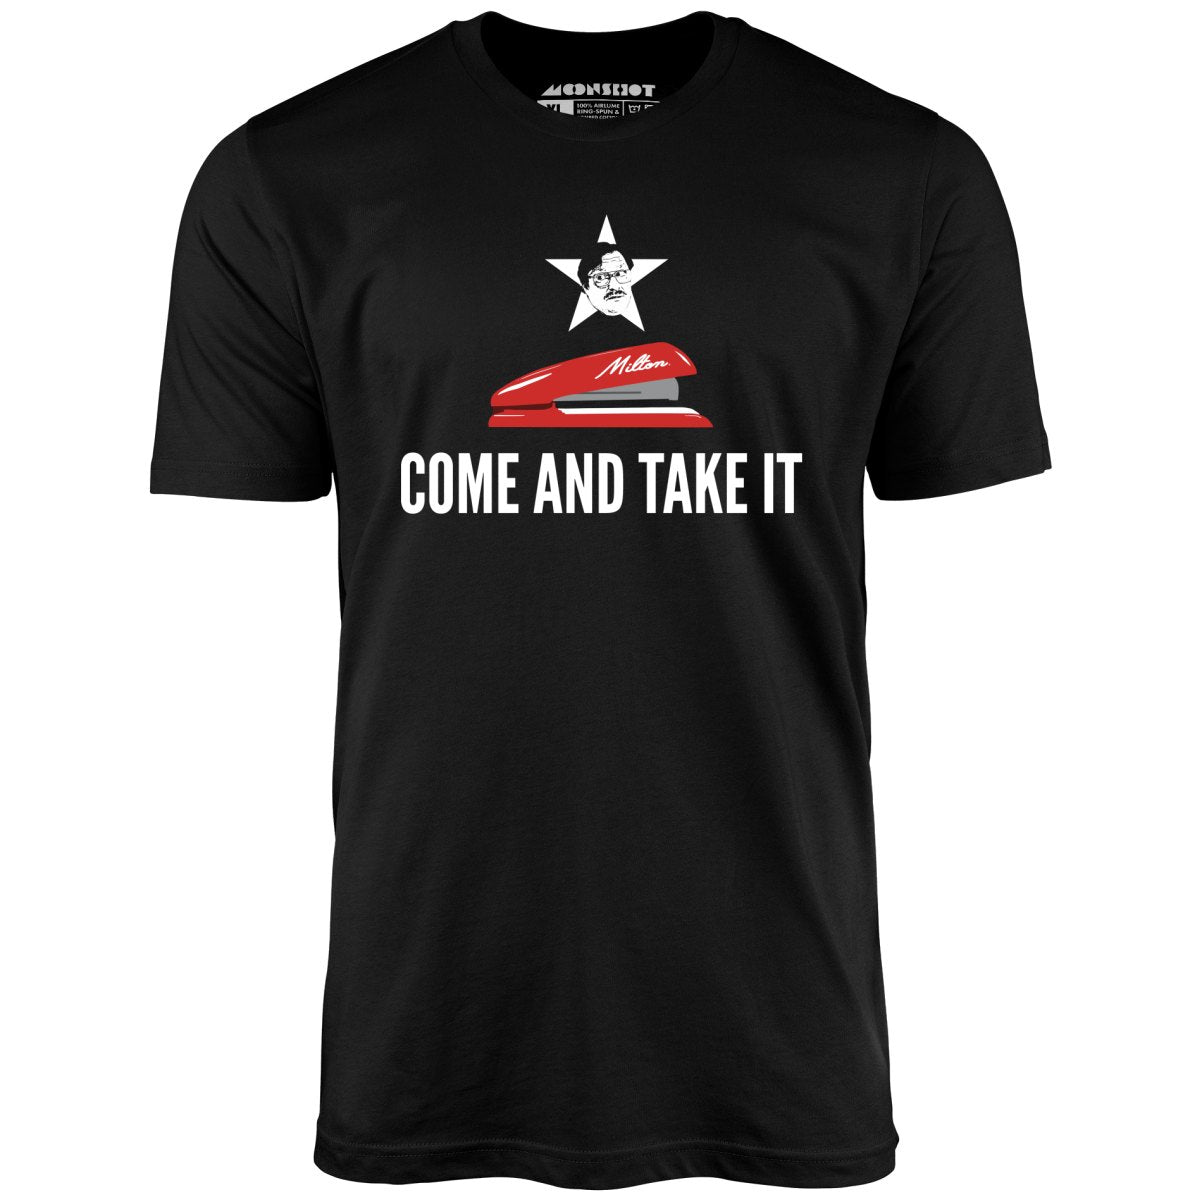 Milton's Red Stapler - Come and Take It - Unisex T-Shirt